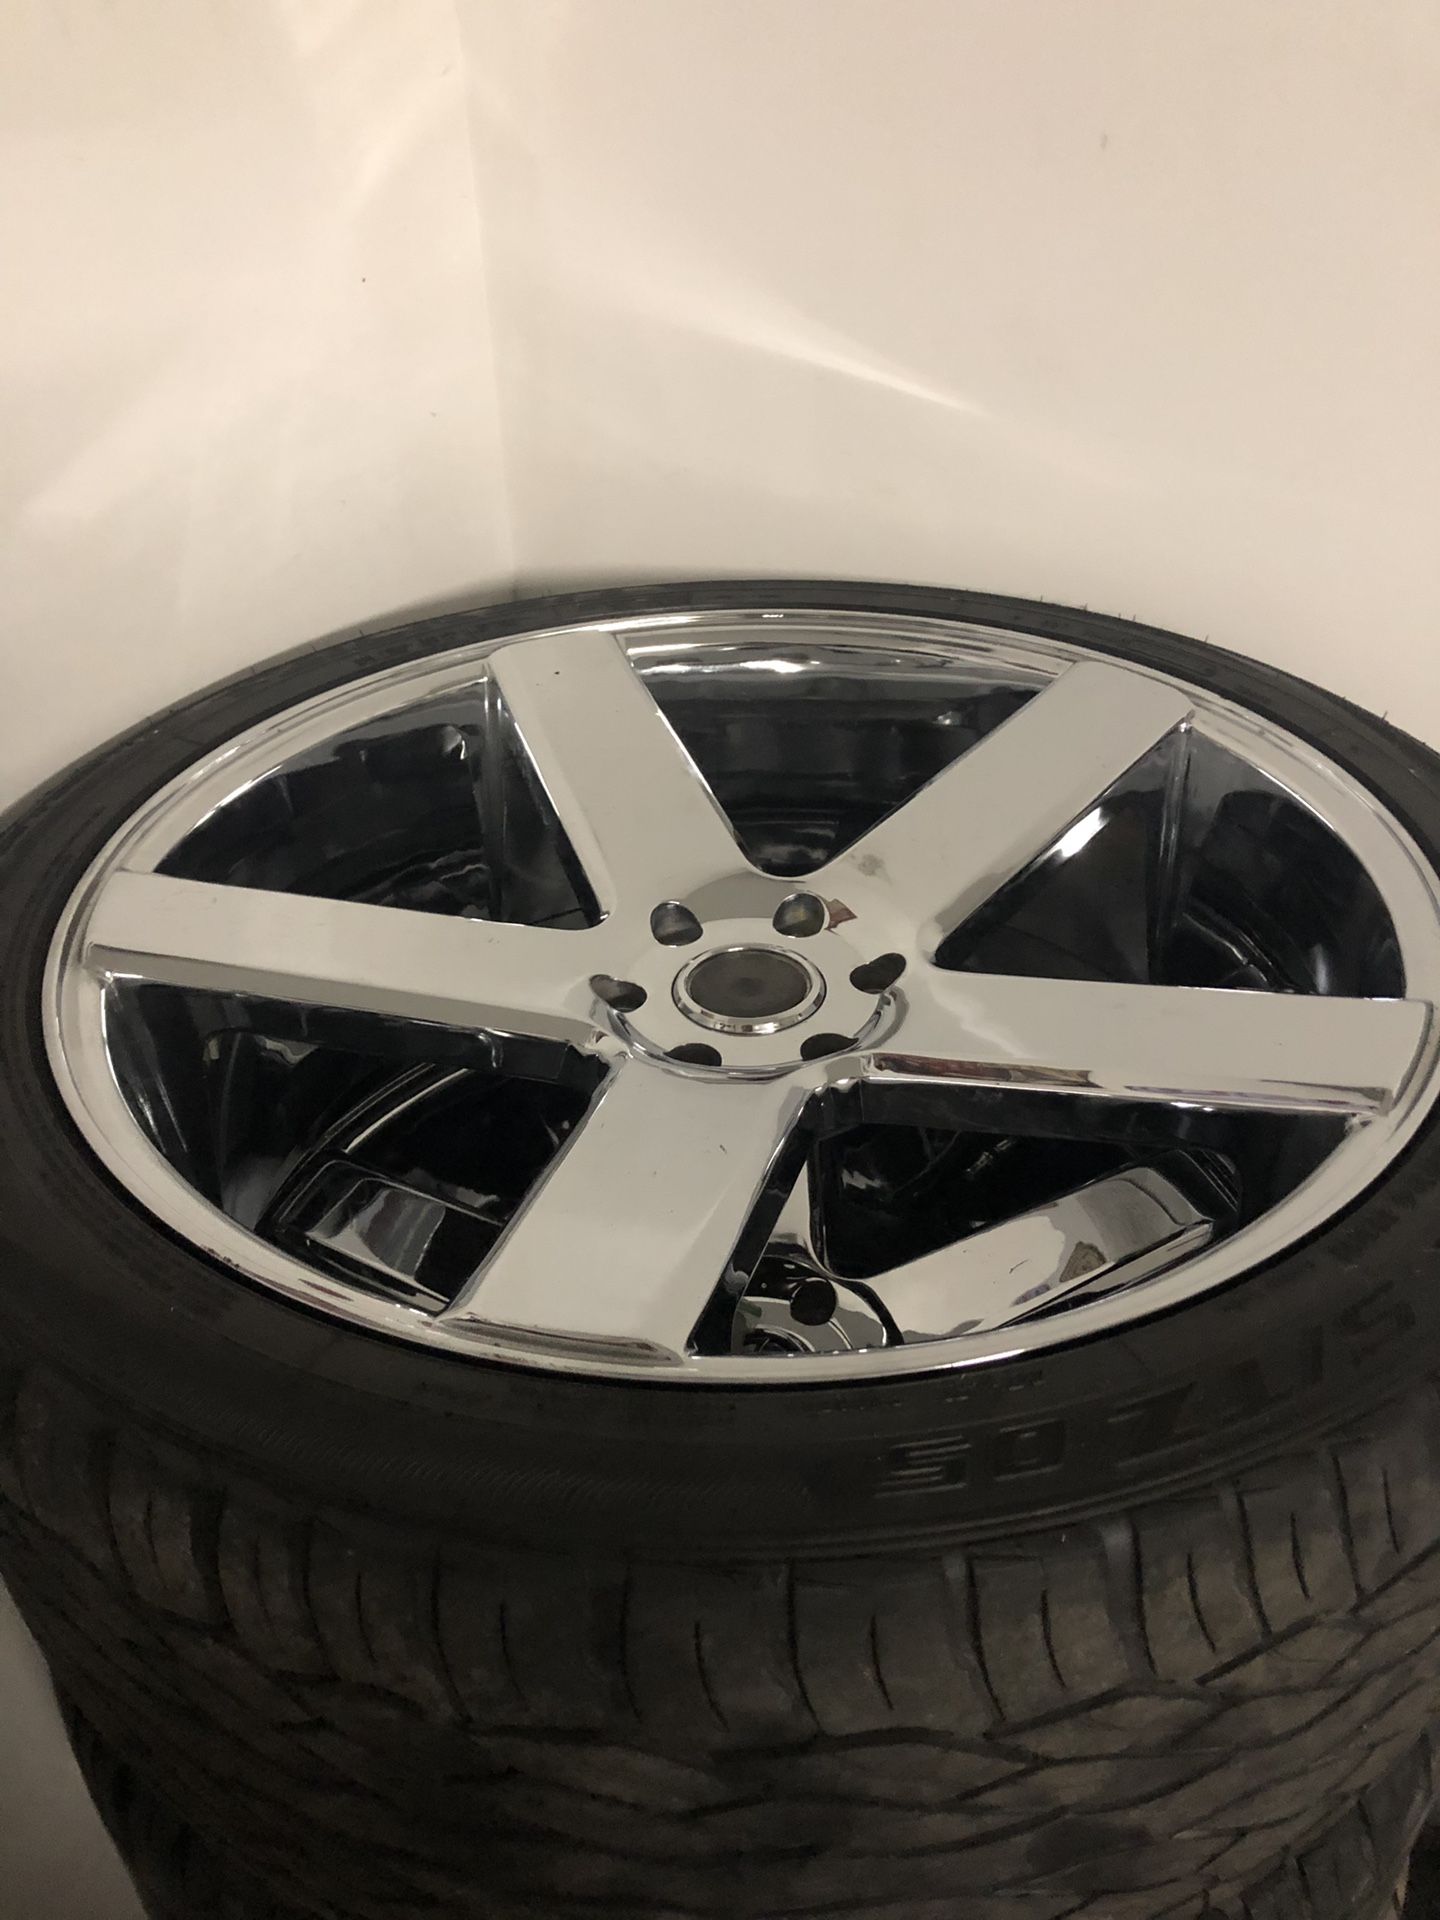 Dub brand 24” aluminum wheels with tires. Great condition